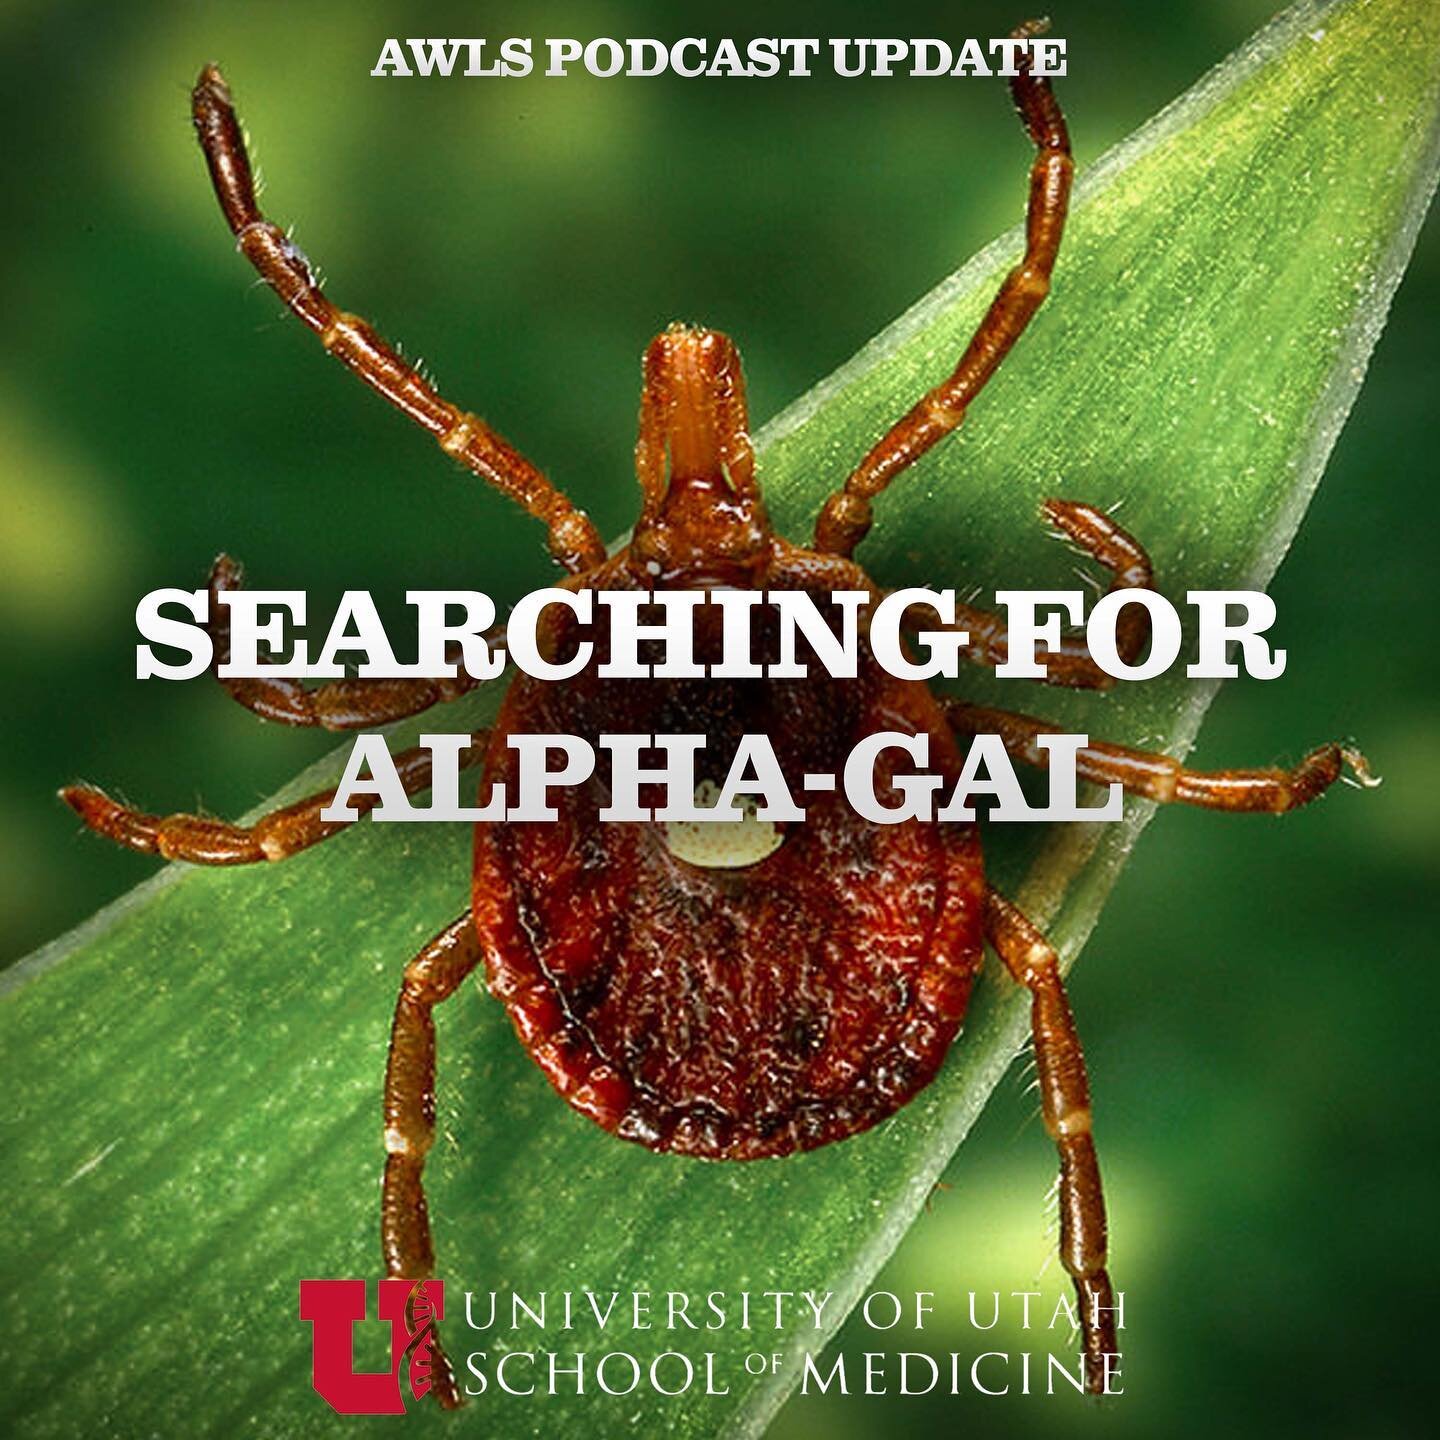 A 57 year old lady had a rash that despite extensive therapy, would not go away. Doctors went searching for the cause and found of all things - sugar - Alpha Gal.

Listen to our AWLS podcasts wherever you get your podcasts.
 
For more on wilderness m